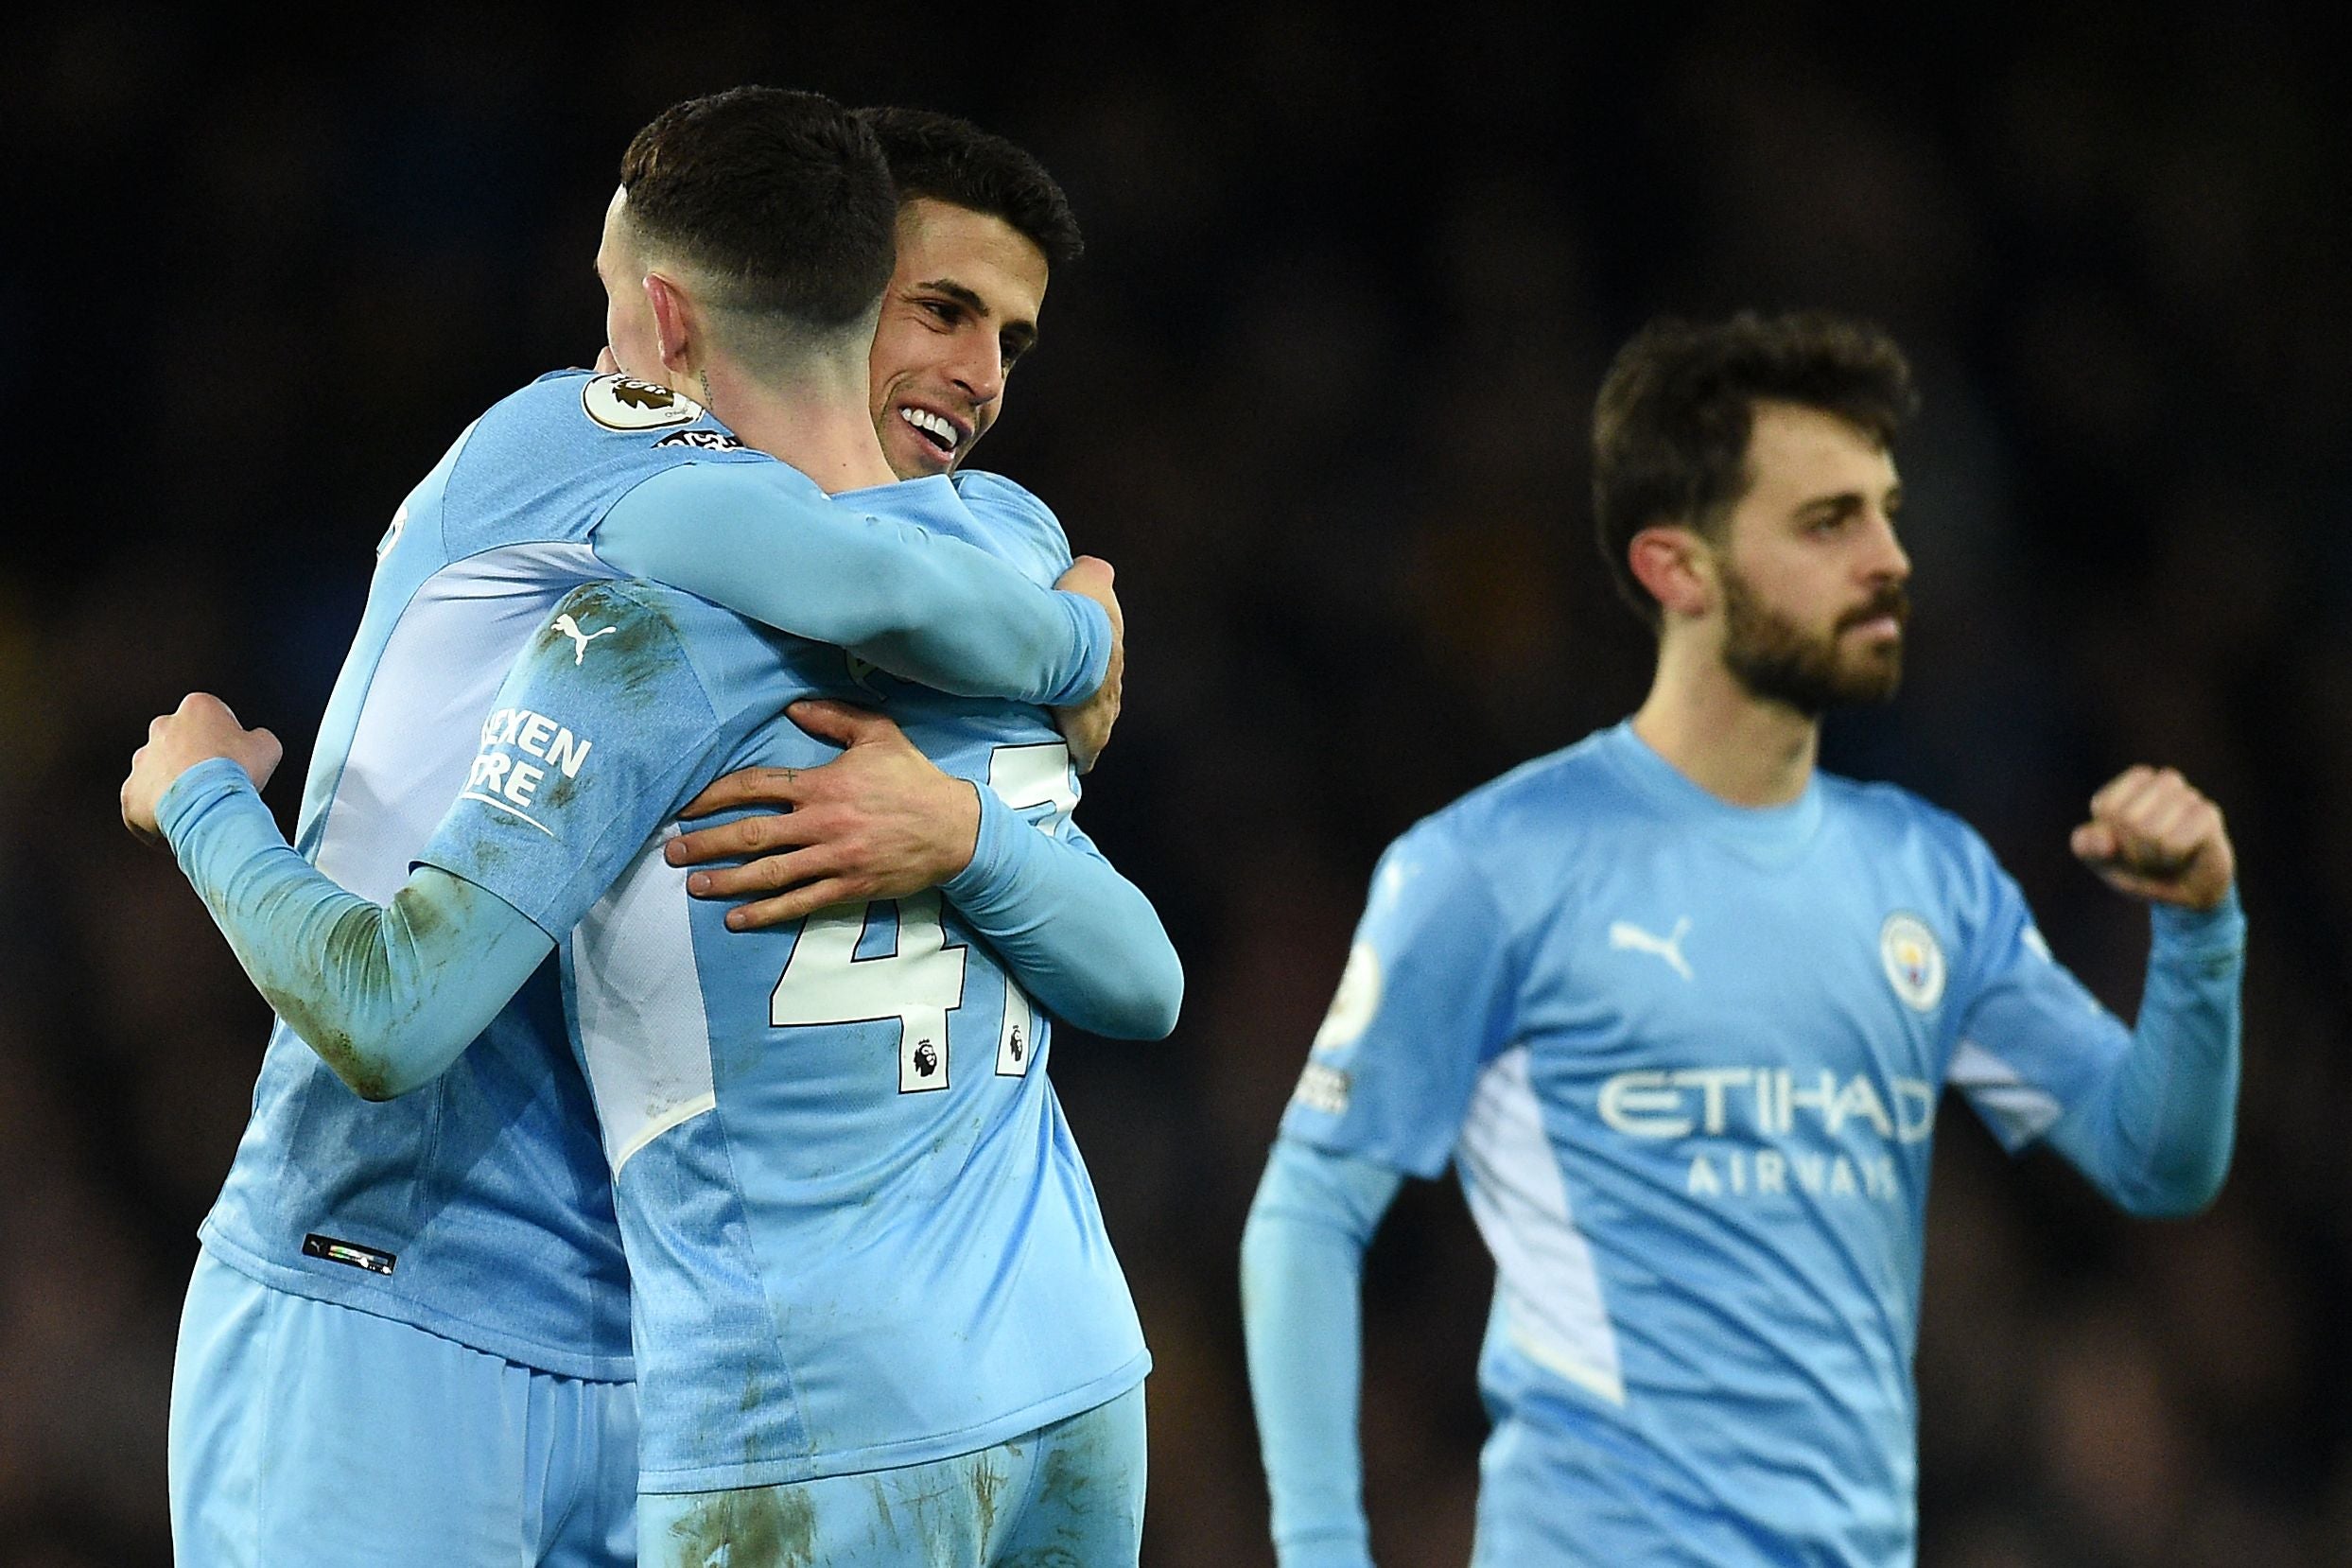 Manchester City will look to avoid an upset when they face Peterborough United